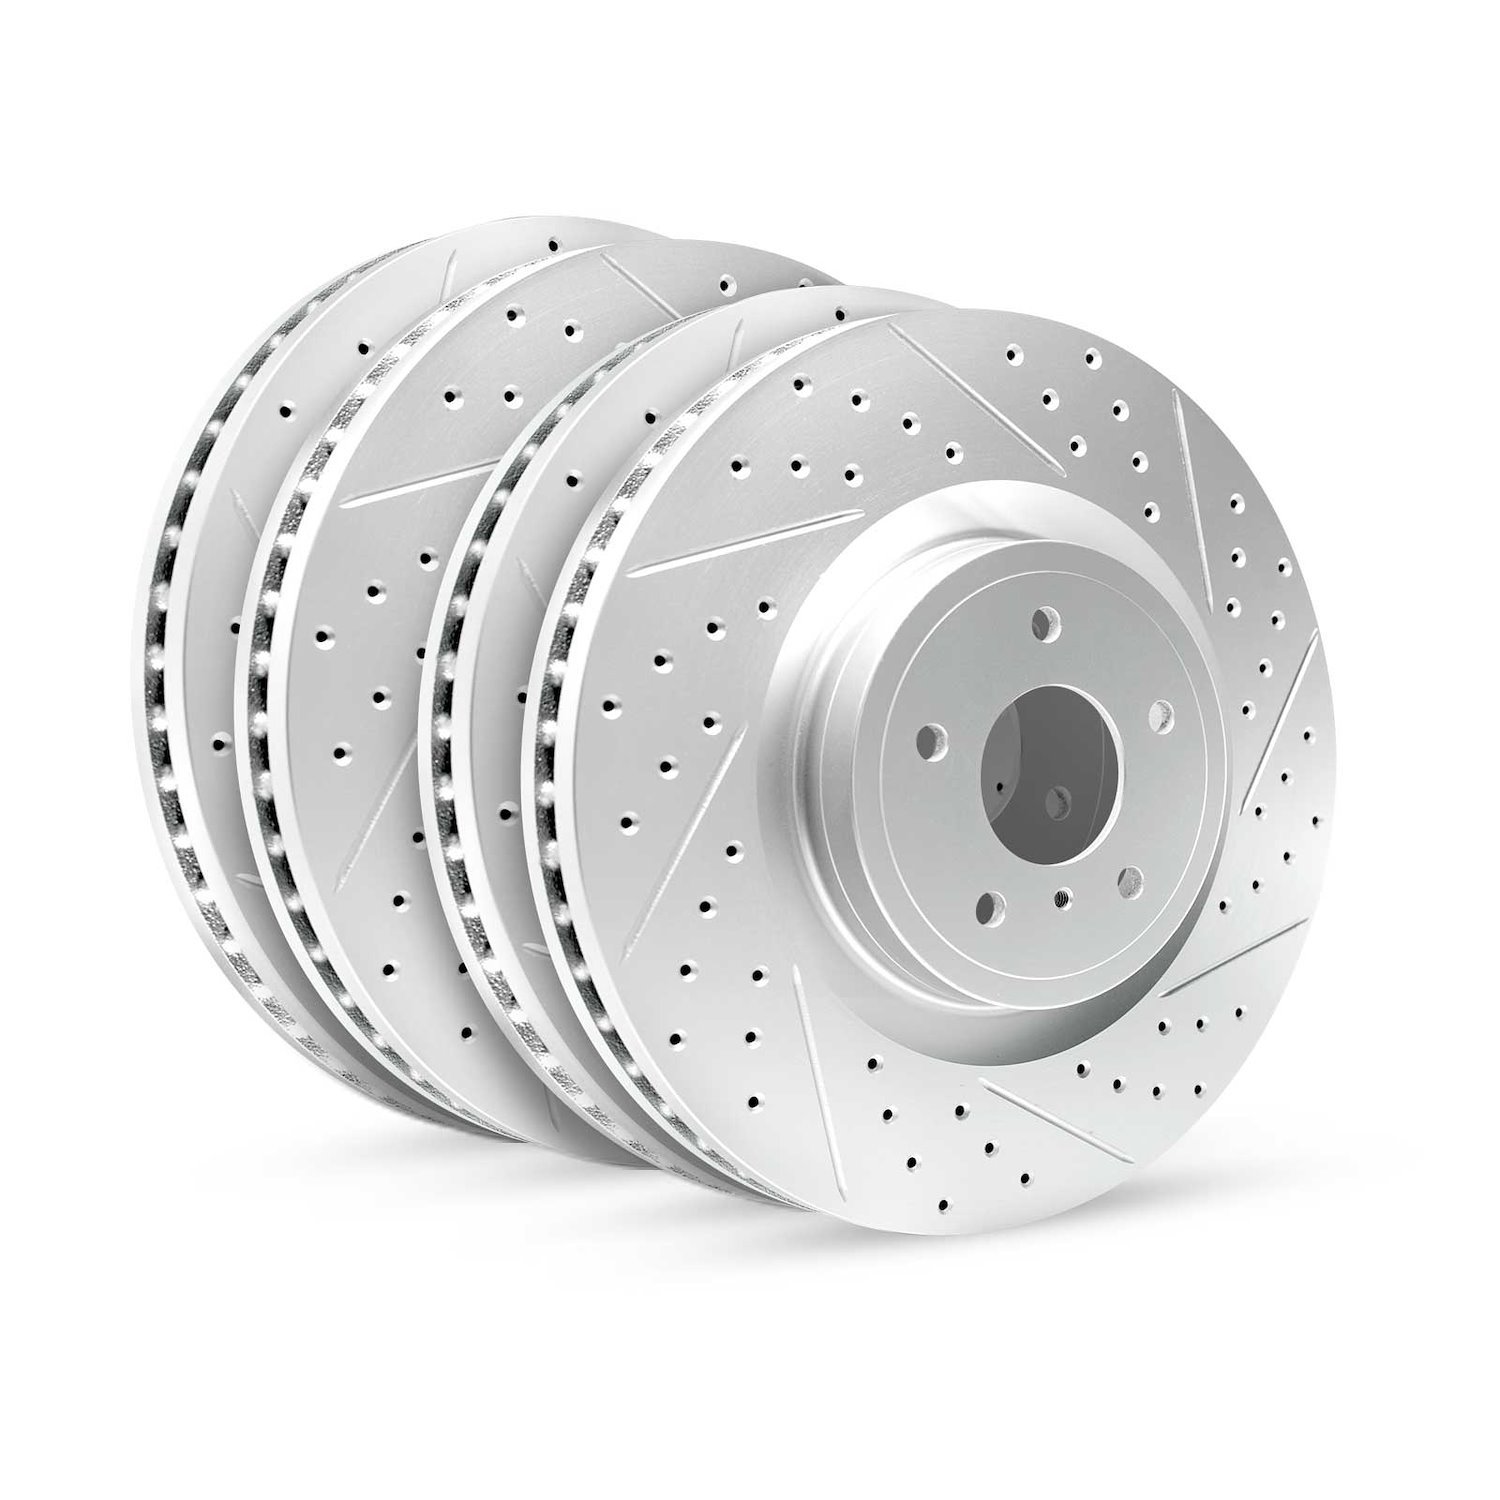 GEO-Carbon Drilled/Slotted Rotors, 2012-2018 Ford/Mazda,